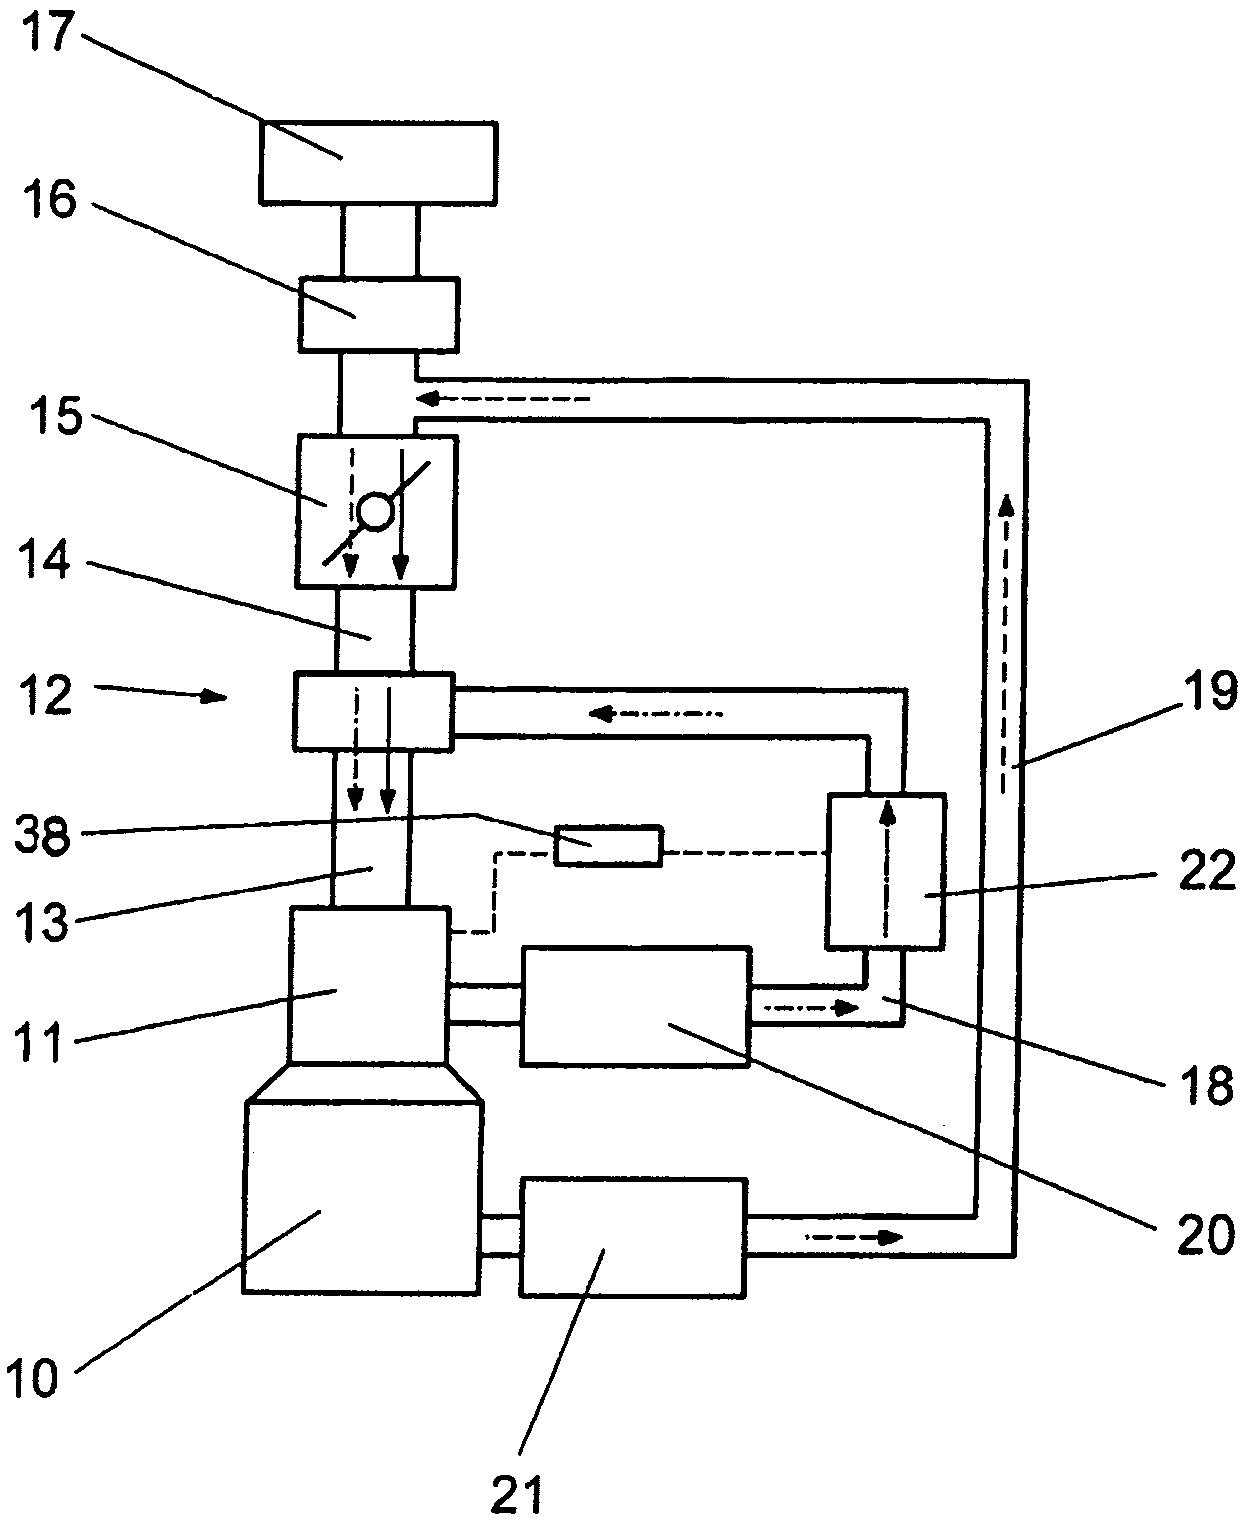 Method and apparatus for venting a crankcase of an internal combustion engine